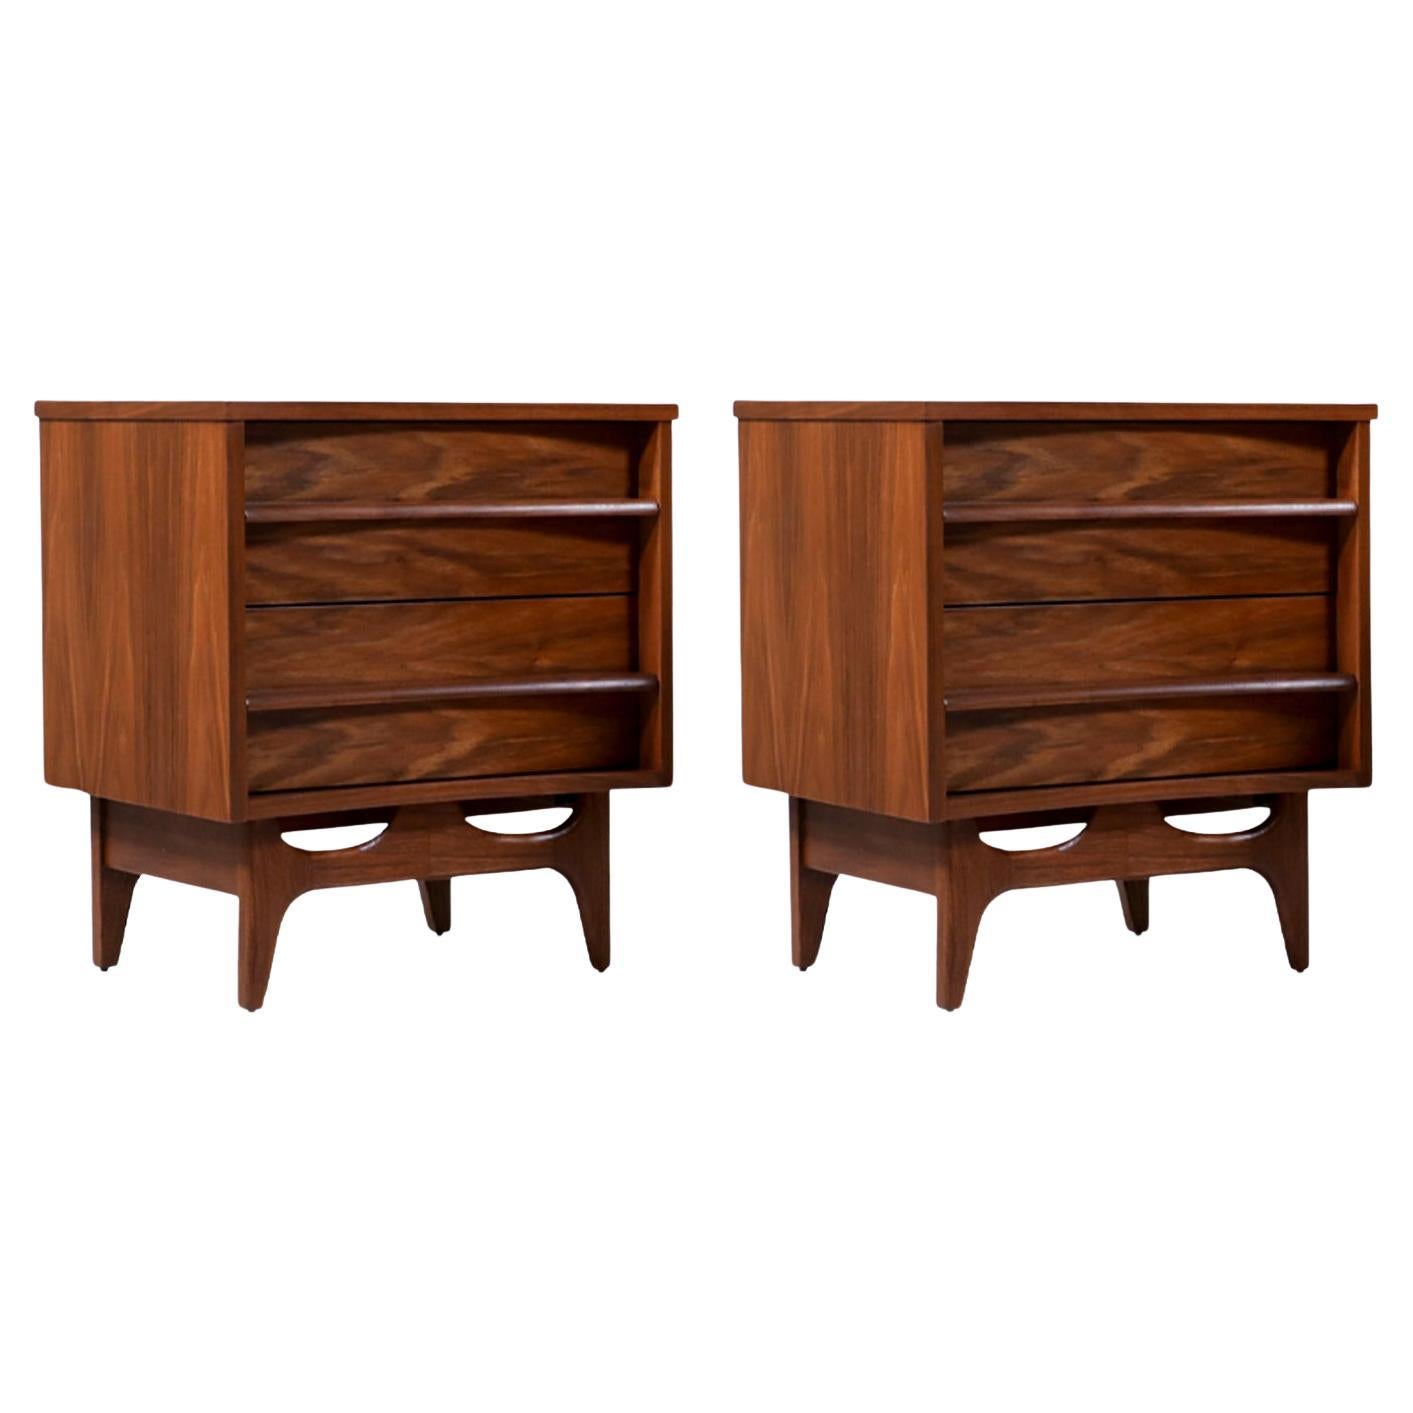 Mid-Century Modern Curved-Front Night Stands by Young Furniture Co. For Sale